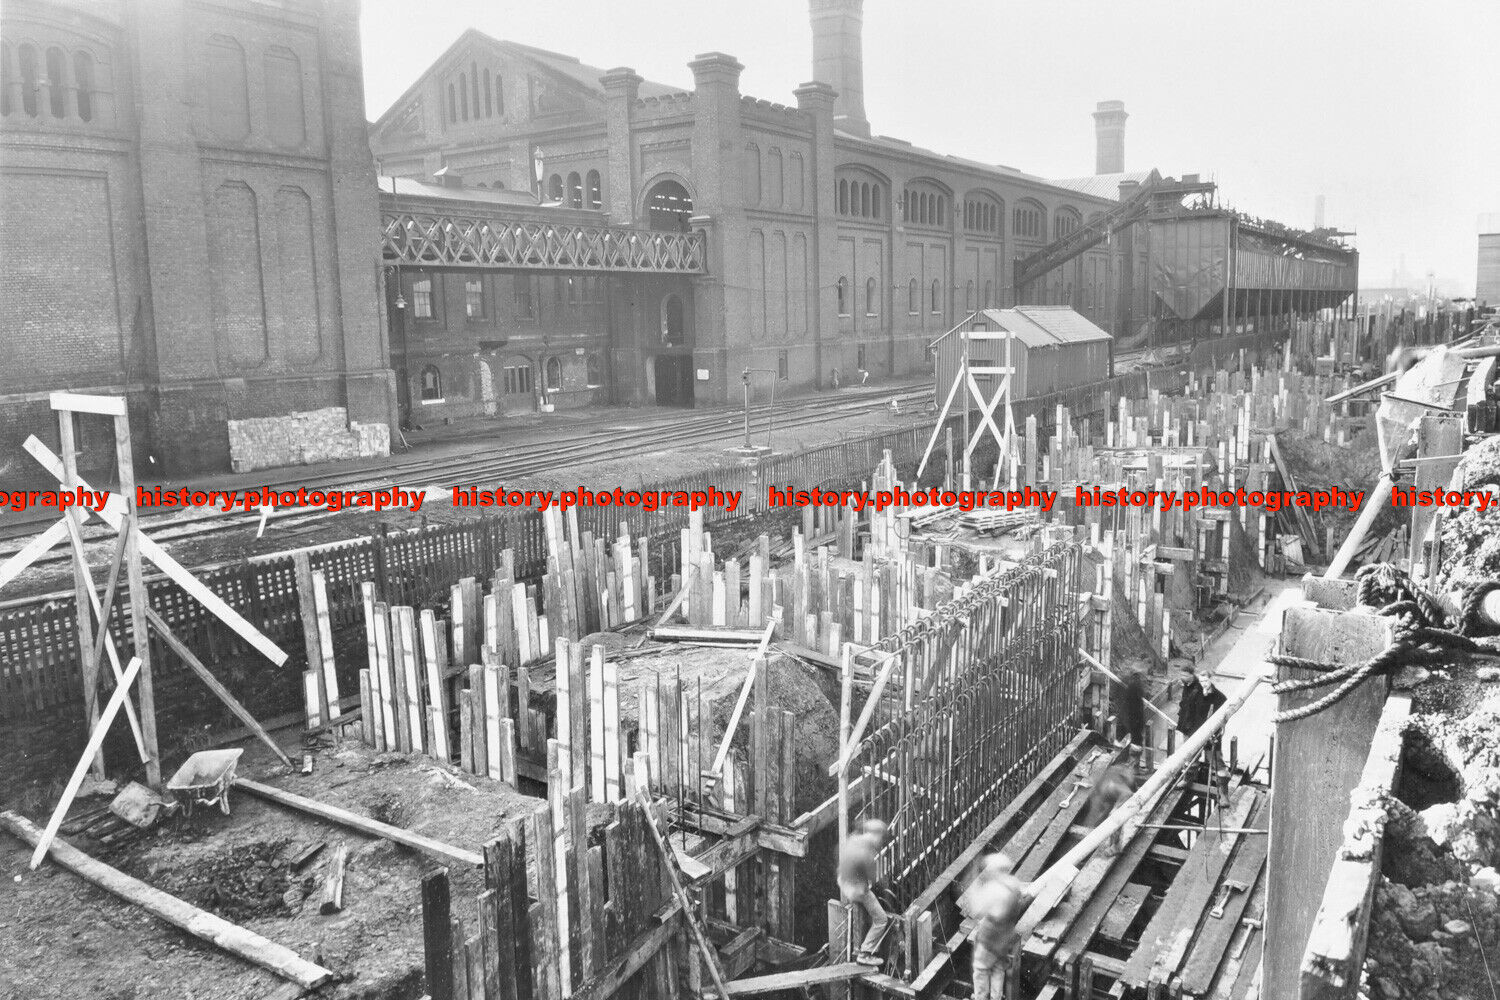 F001897 New construction work. Beckton Sewage Works. Woolwich. London. 1938